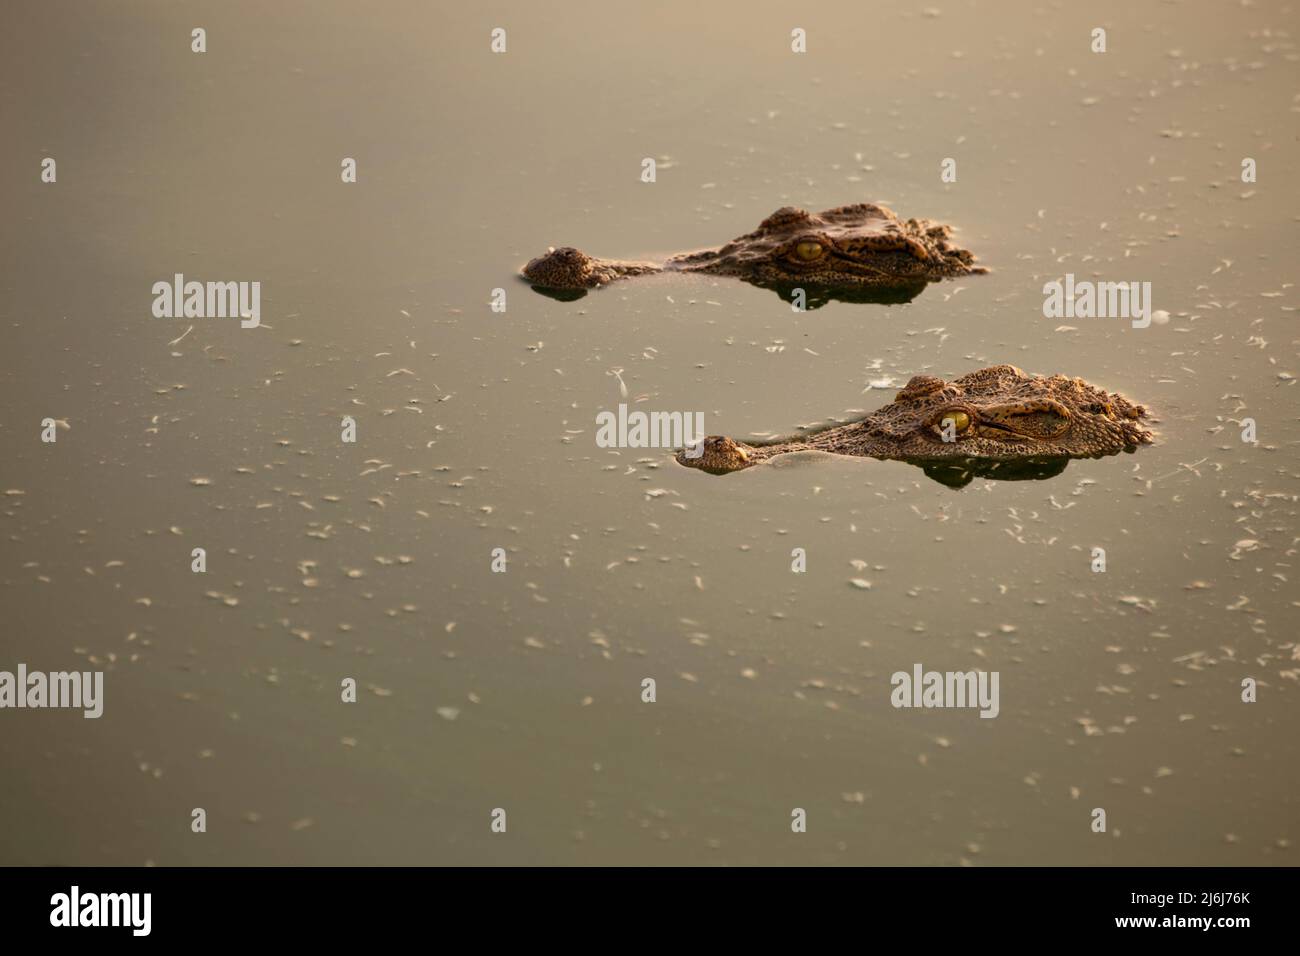 hungry wildlife crocodiles hidden in the water for hunting prey in the river. Stock Photo